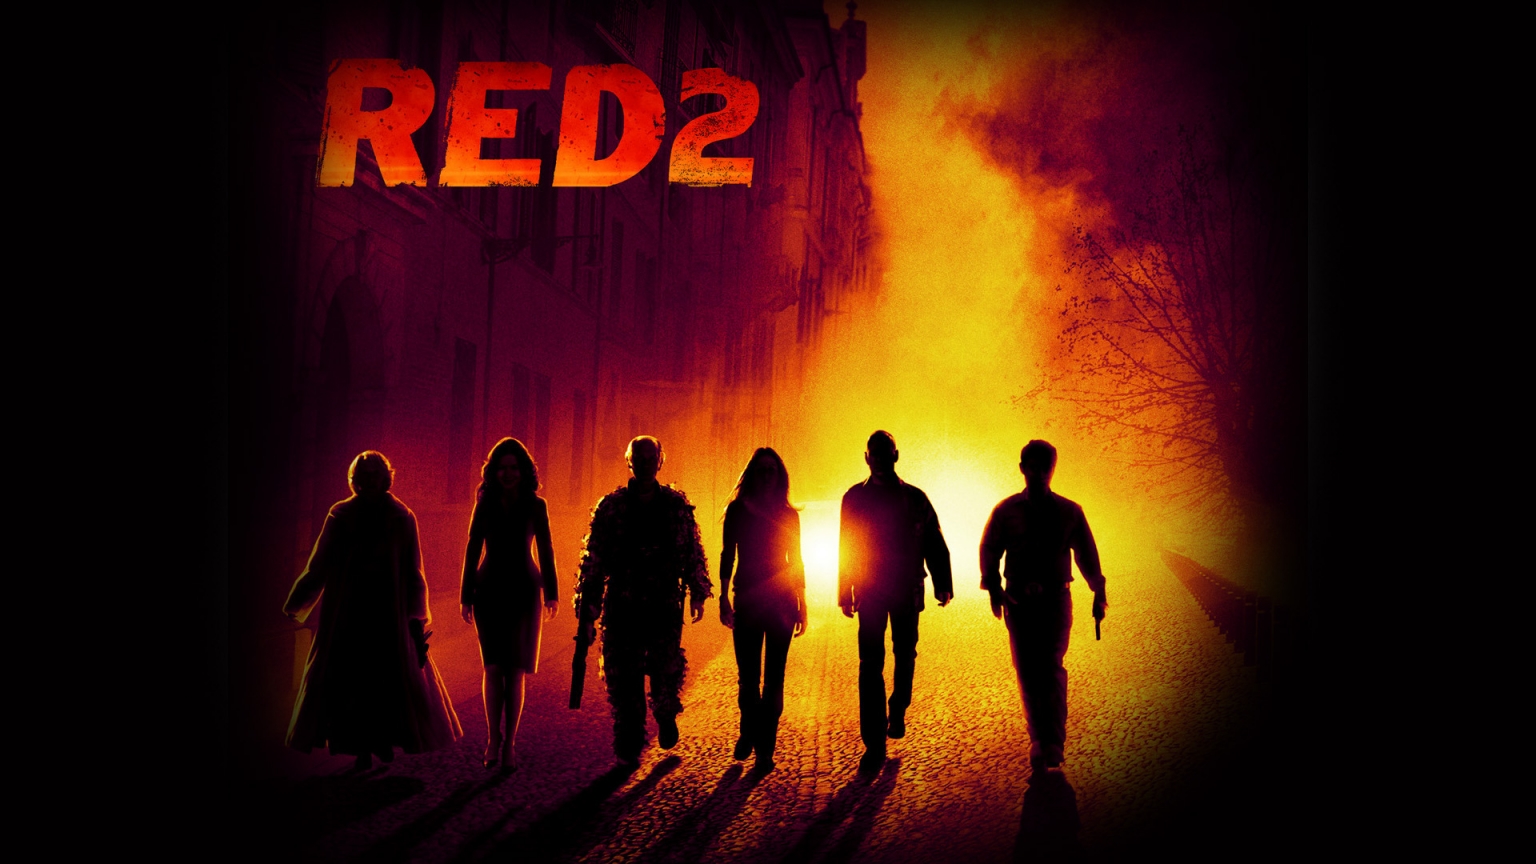 2013 RED 2 for 1536 x 864 HDTV resolution